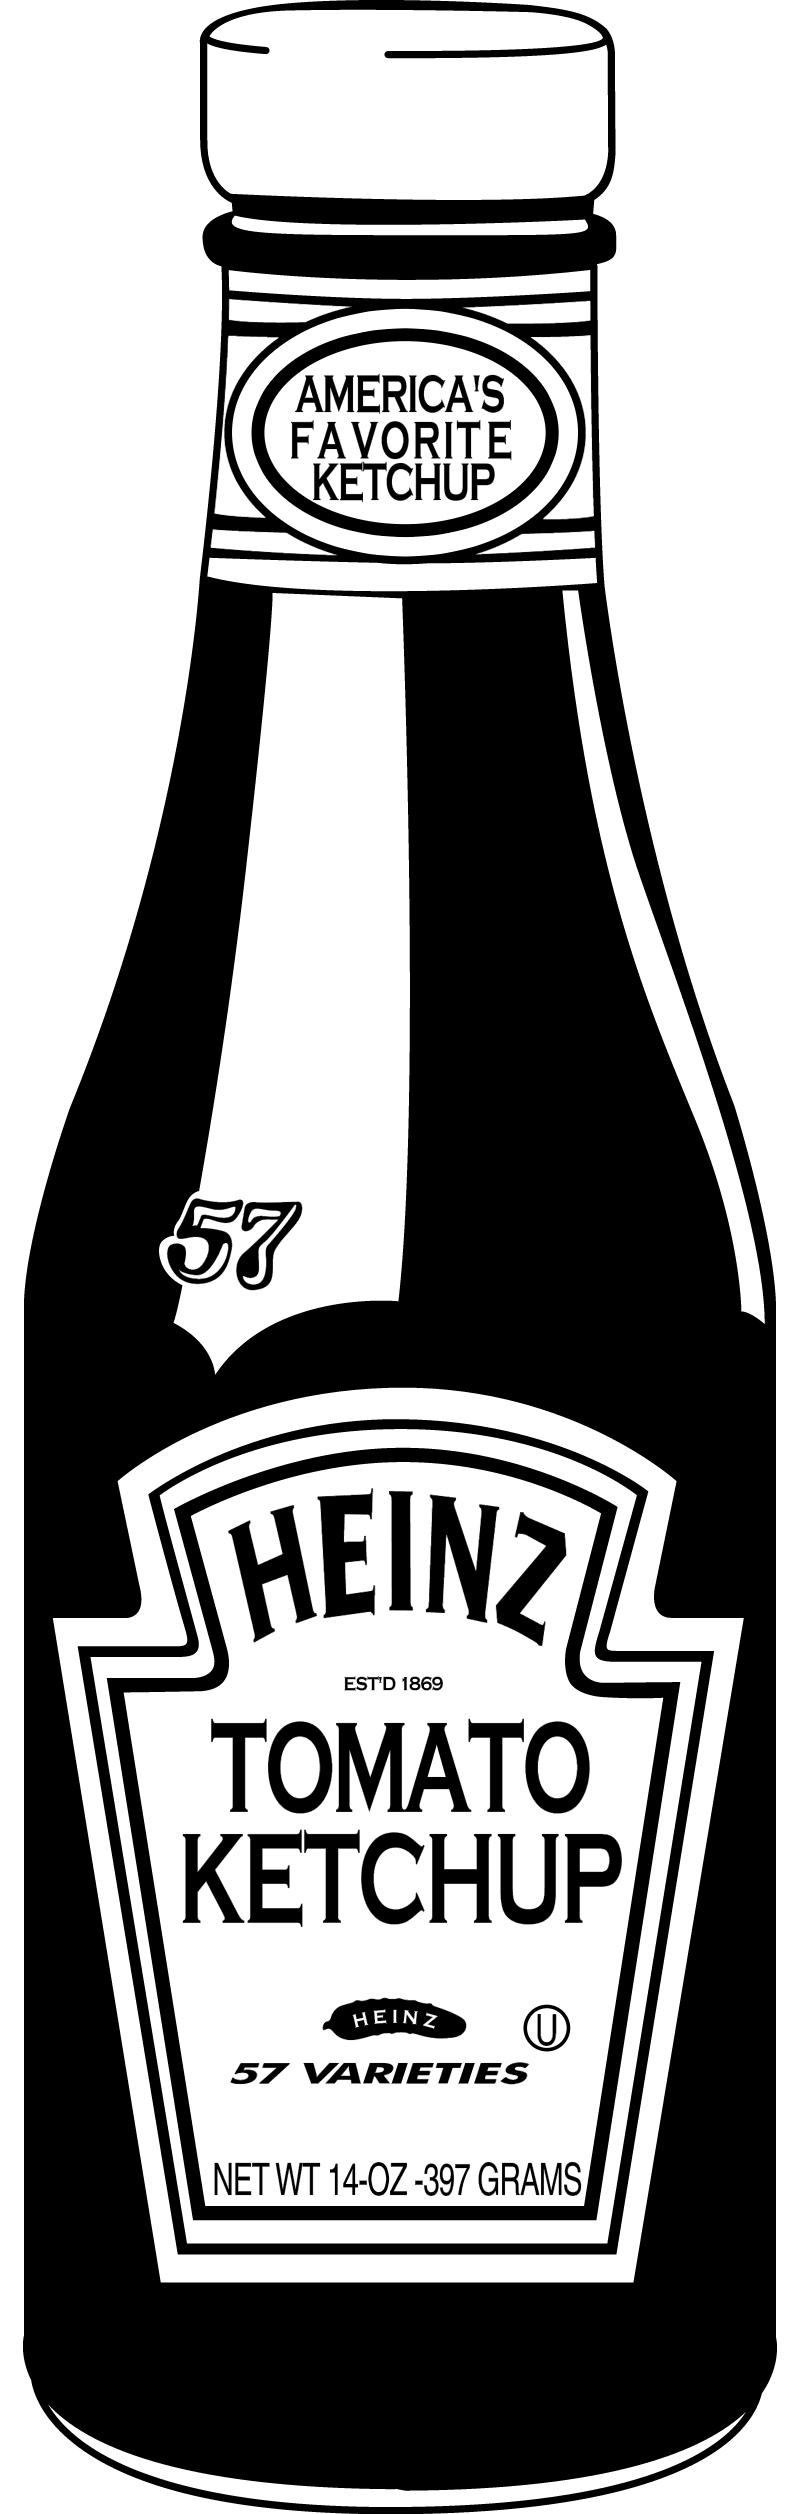 Heinz Ketchup Bottle ⋆ Free Vectors, Logos, Icons and ...